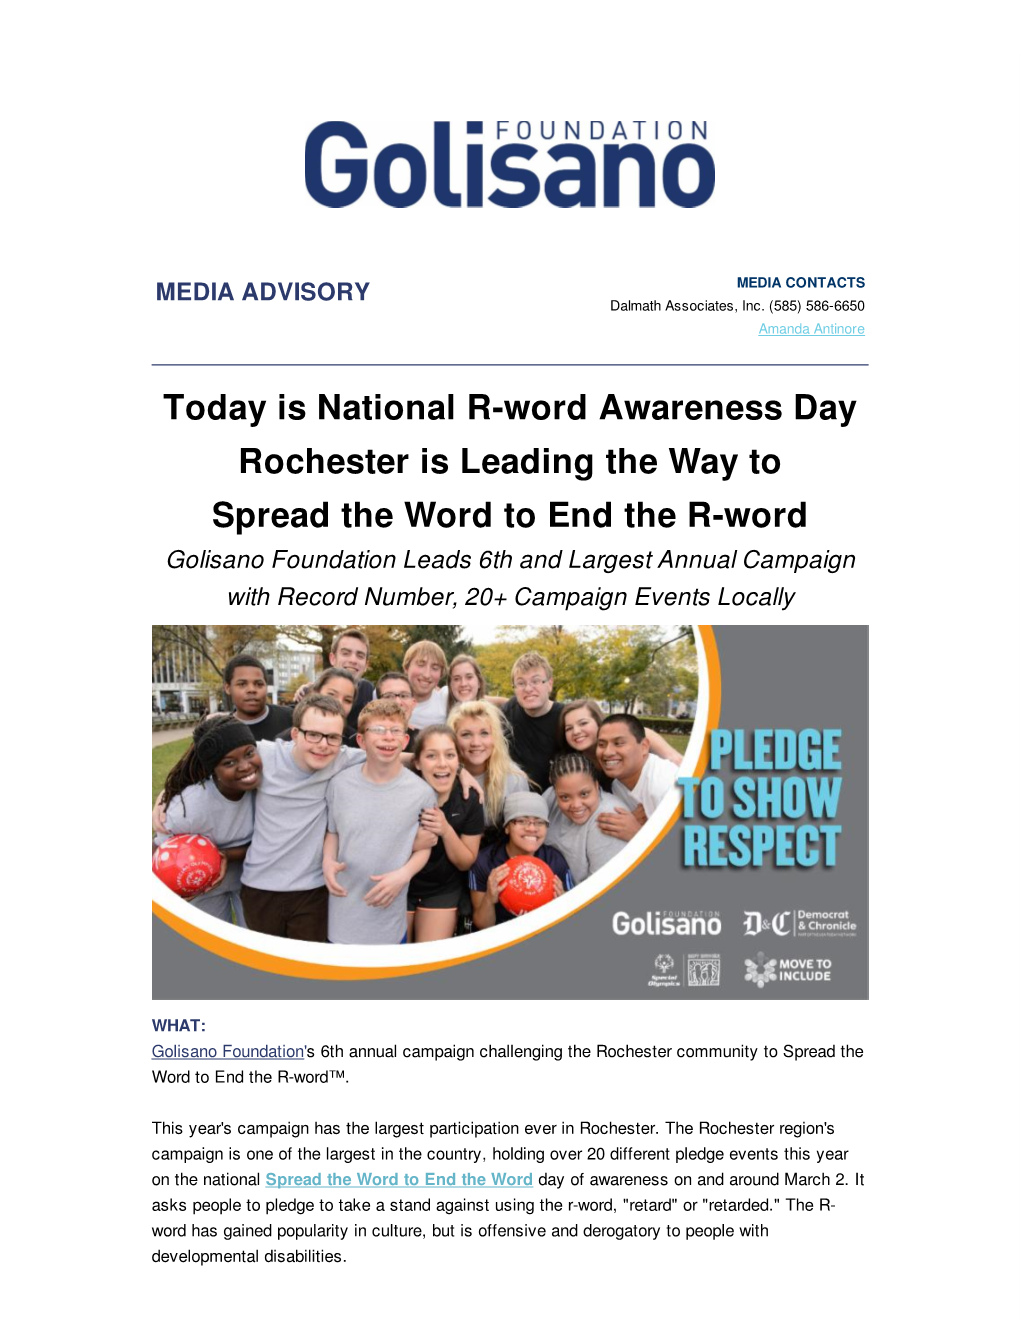 Today Is National R-Word Awareness Day Rochester Is Leading the Way